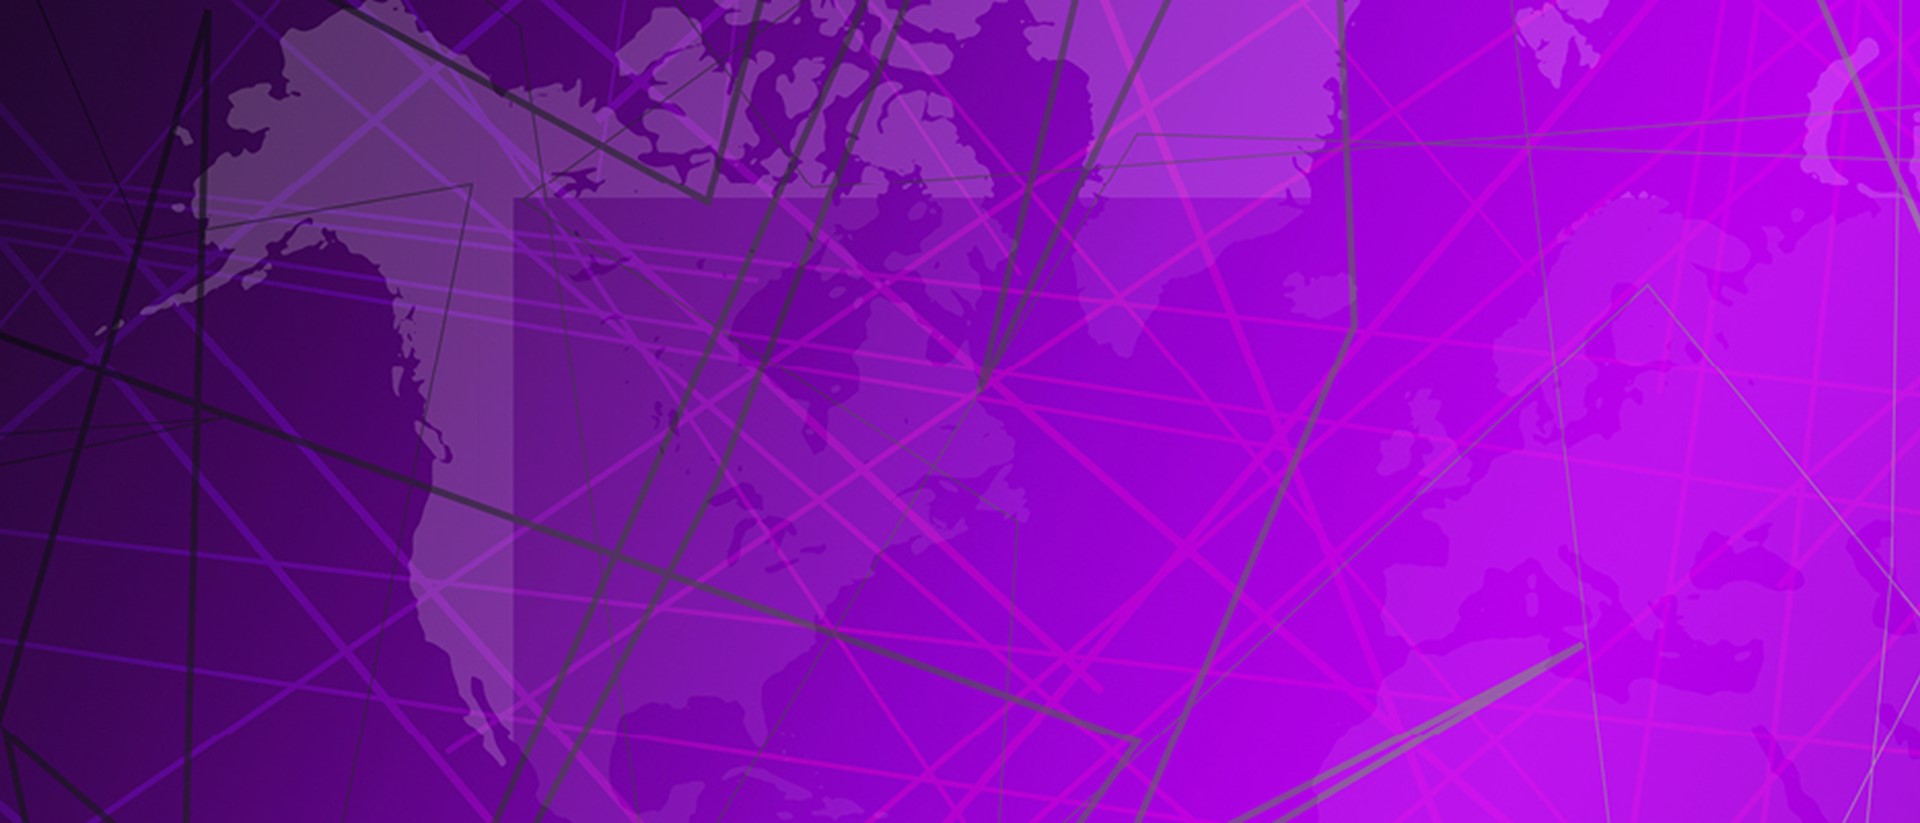 Image of lines on a purple background